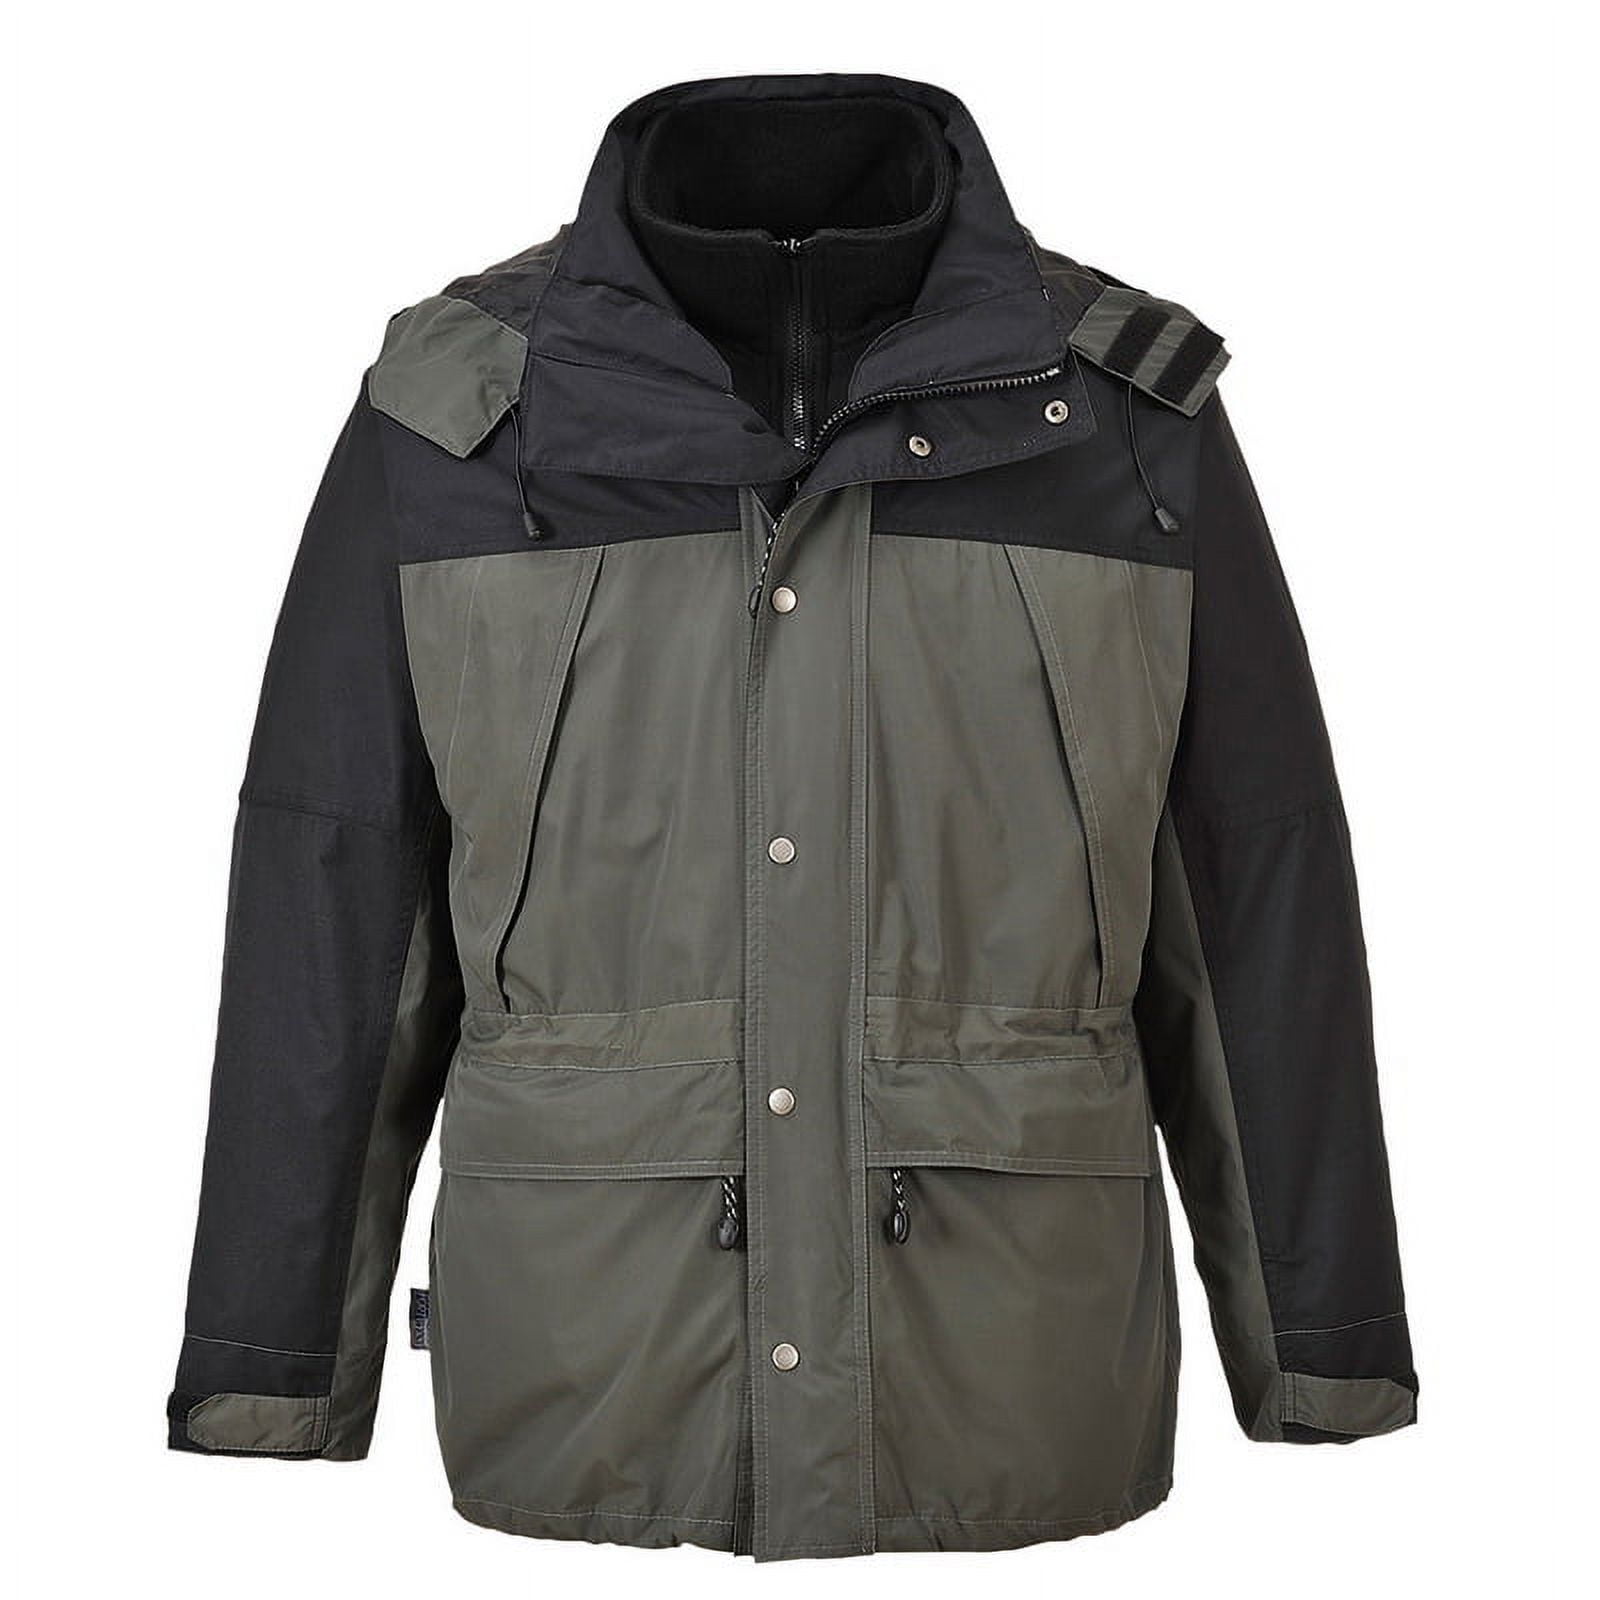 Portwest S532 Orkney 3 in 1 Waterproof Breathable All Weather Jacket Gray, X-Large - image 1 of 3